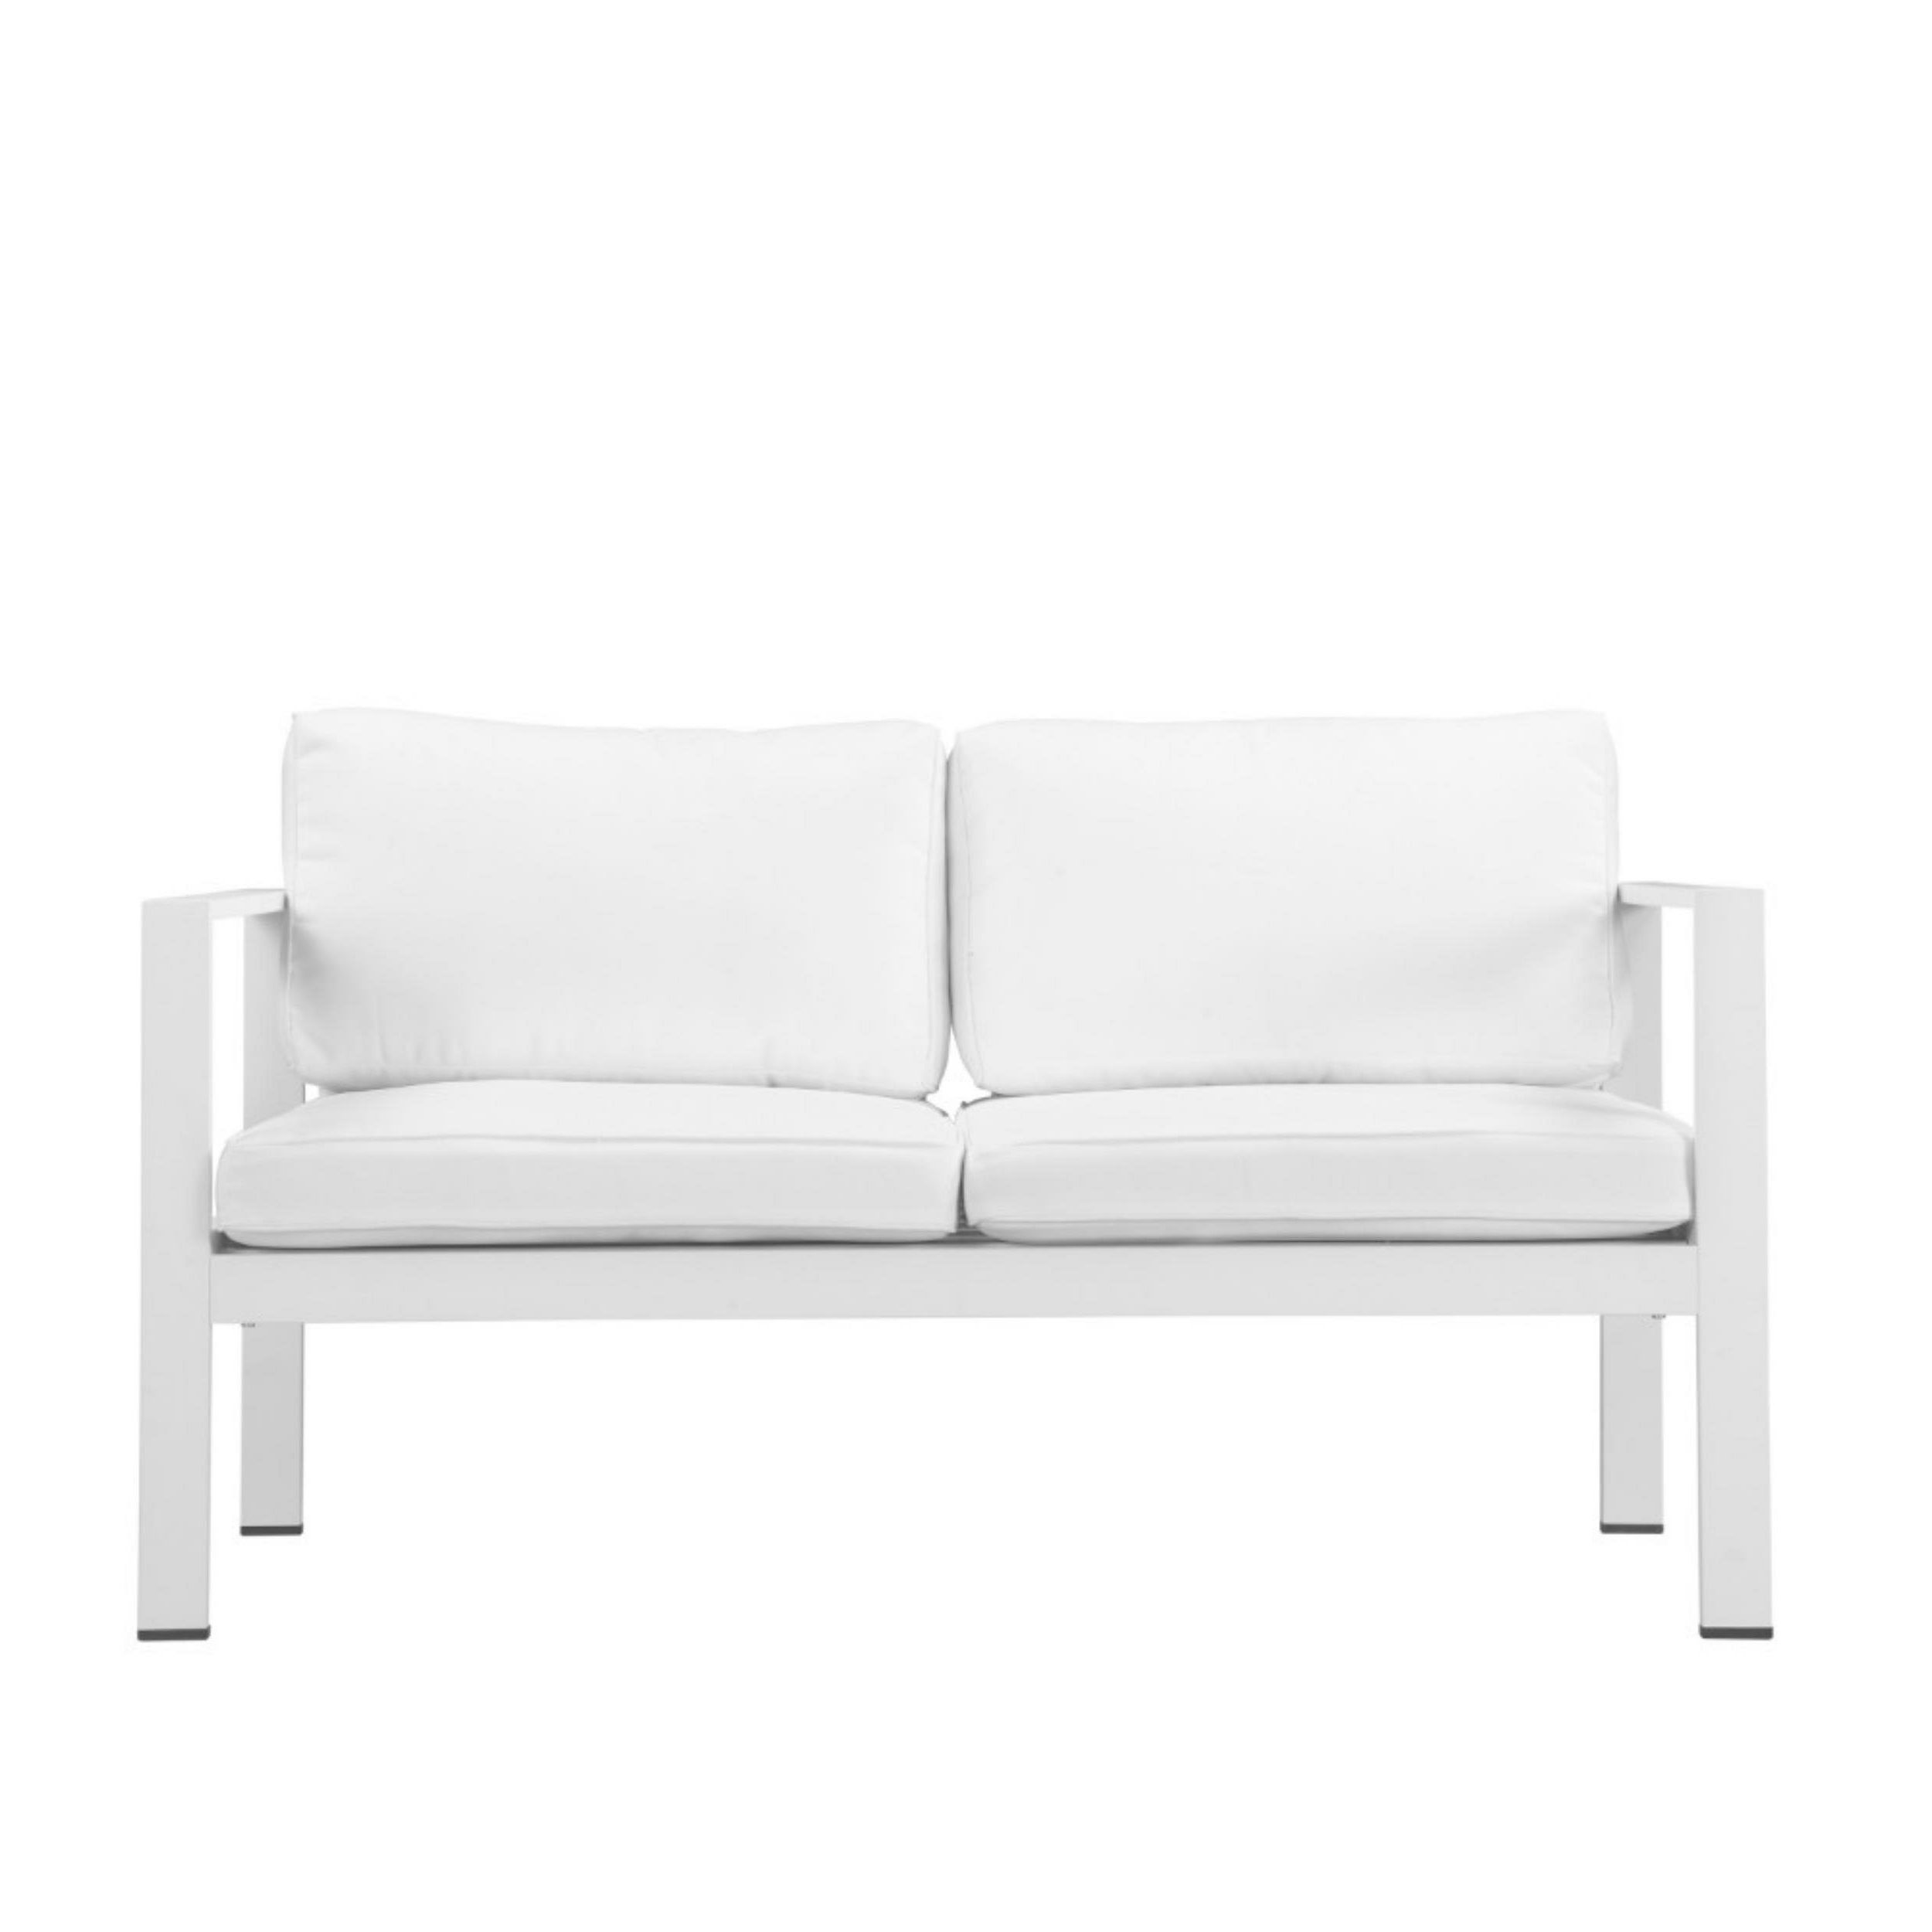 Trendy Baldwin Efficiently Advantageous Upholstered Anodized Aluminum Loveseat  With Cushions With Zeman Ultra Comfortable Upholstered Anodized Aluminum Loveseats With Cushion (View 14 of 25)